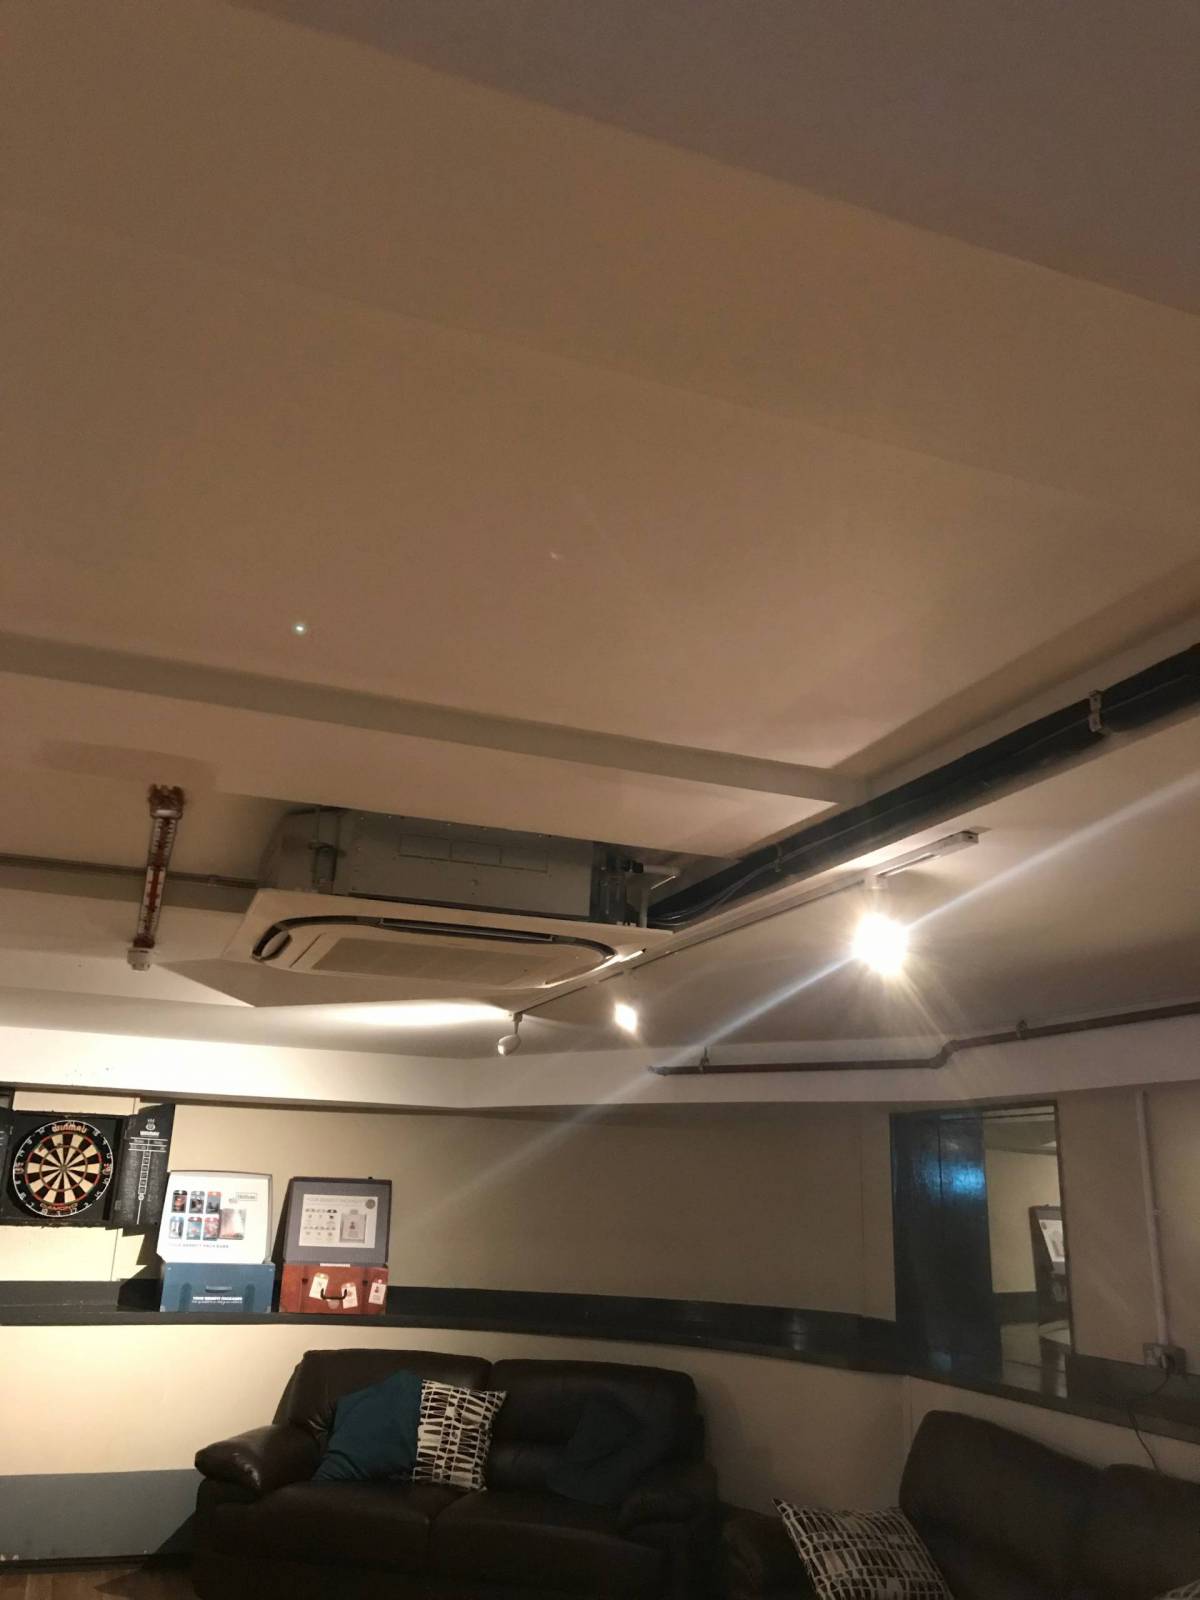 air-conditioning-company-london-air-conditioning-service-london